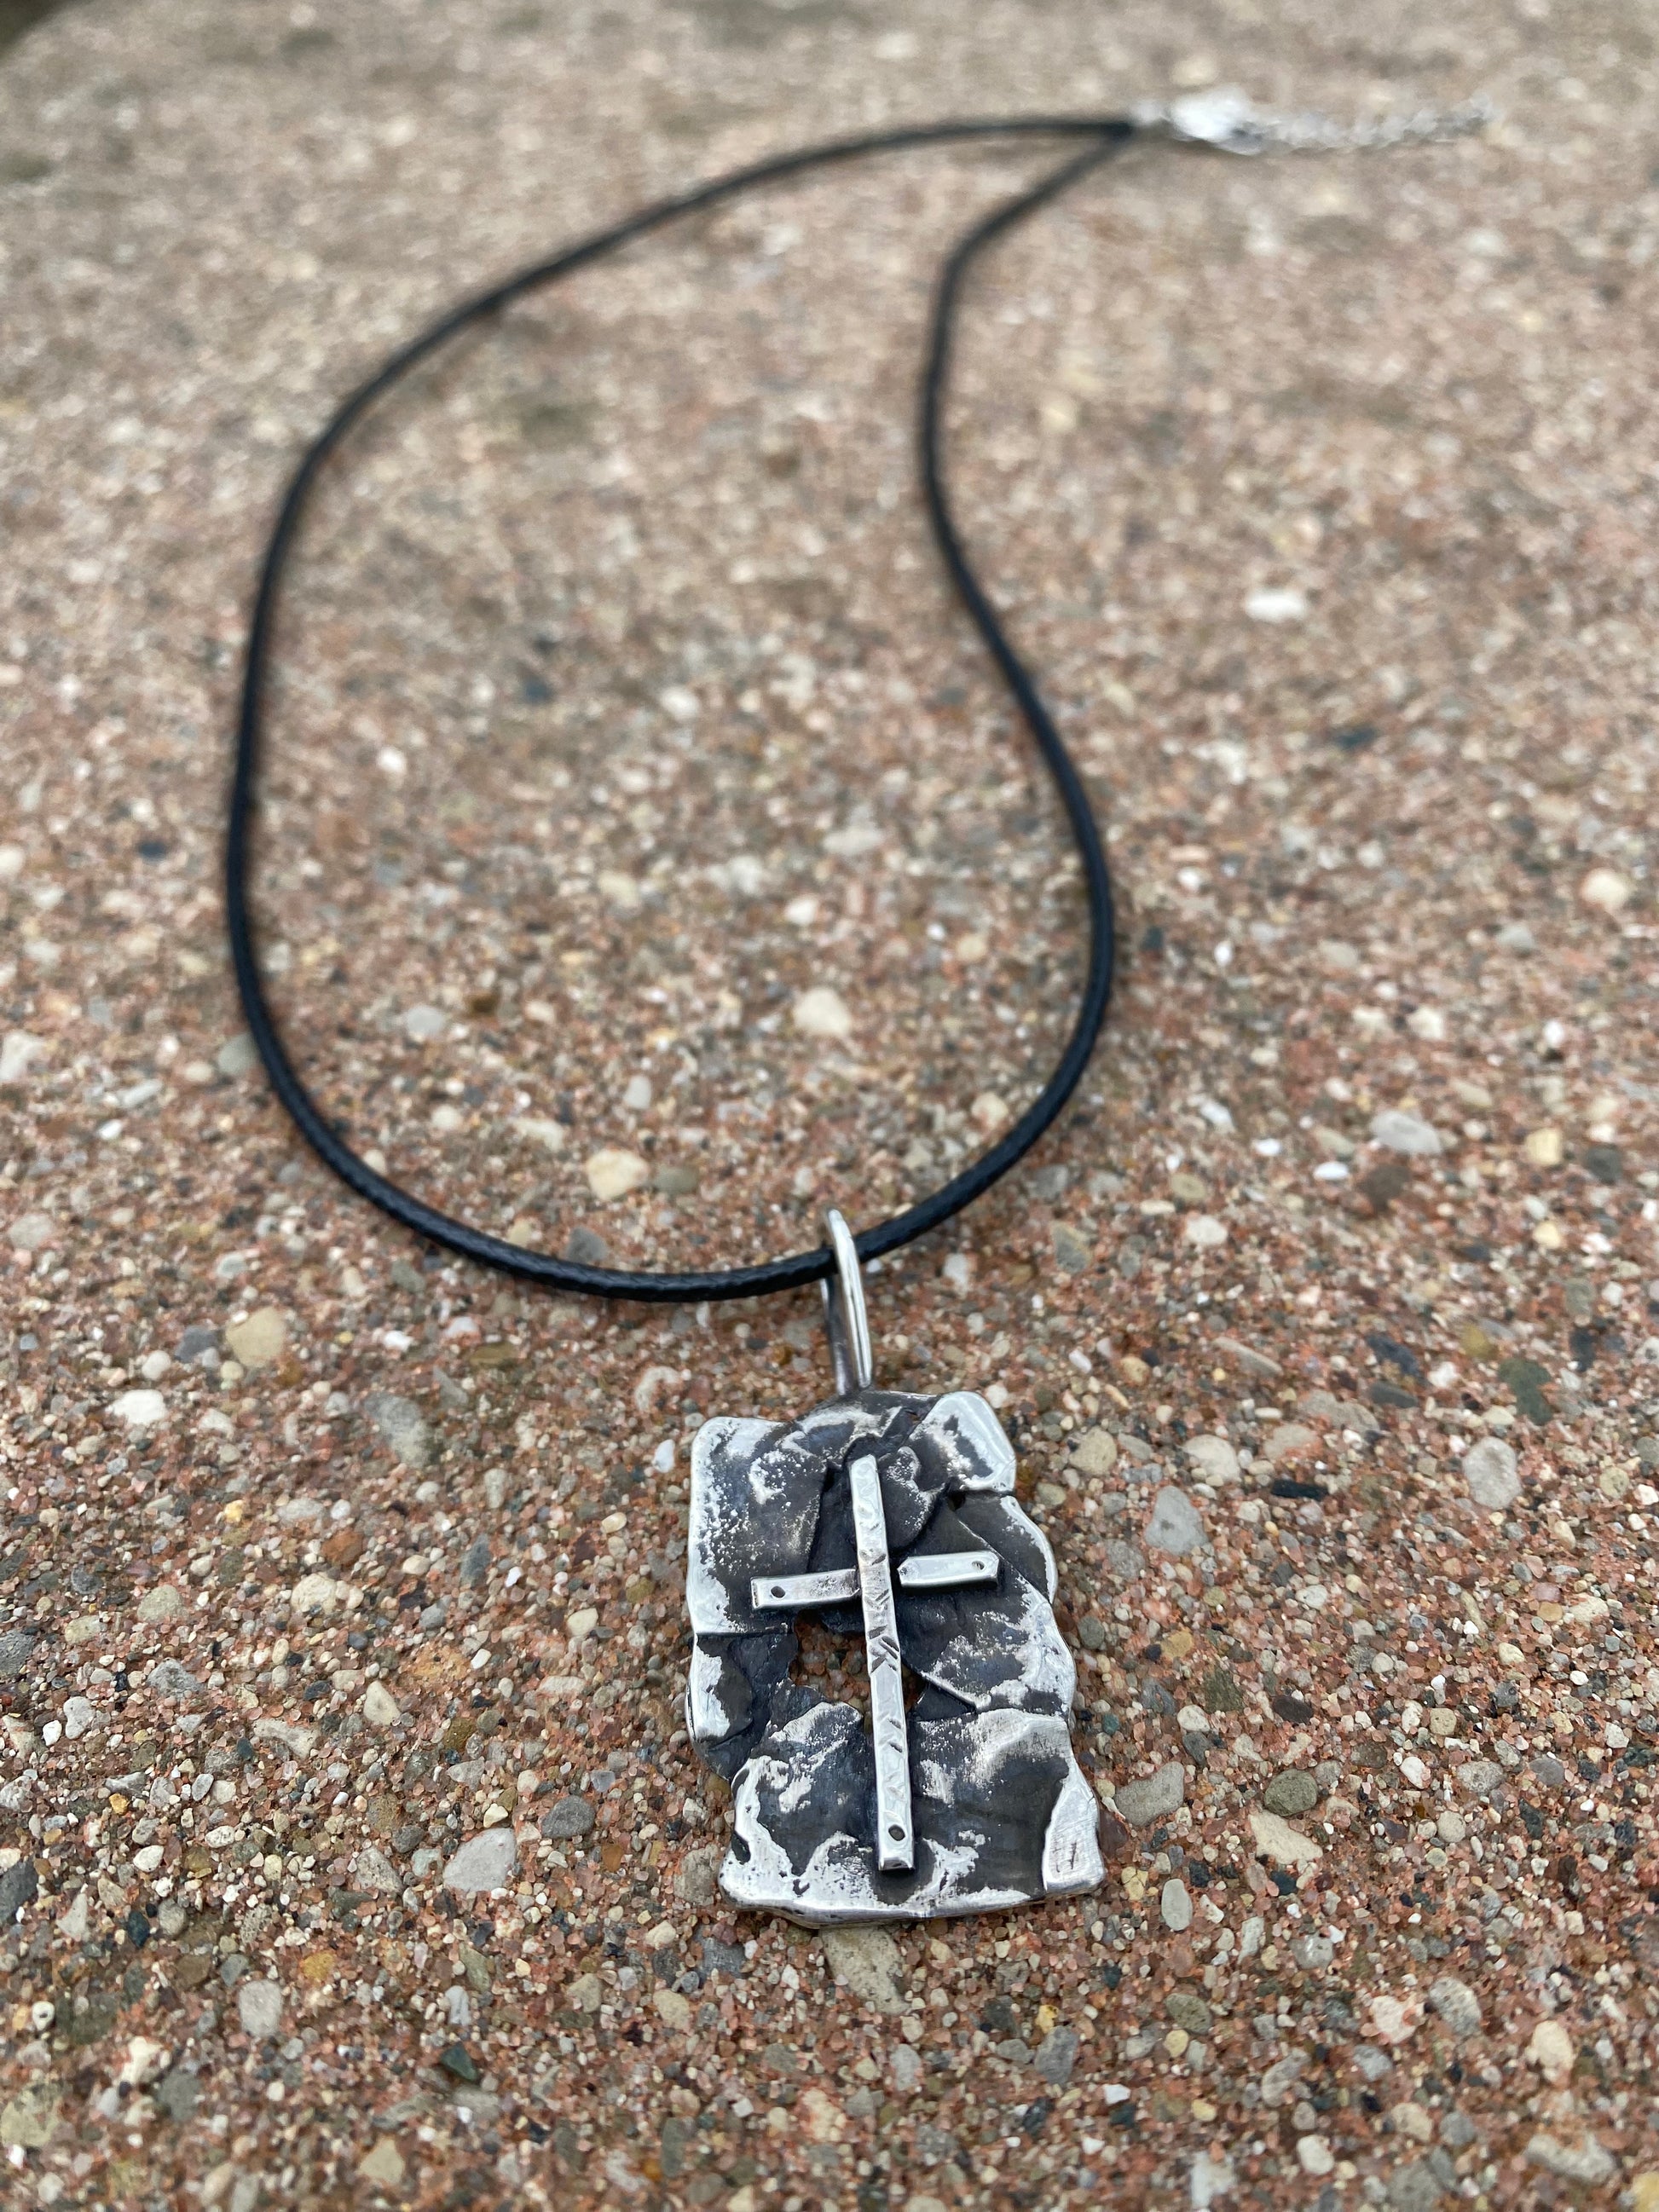 Rugged cross necklaces - collectionsbytracy.com